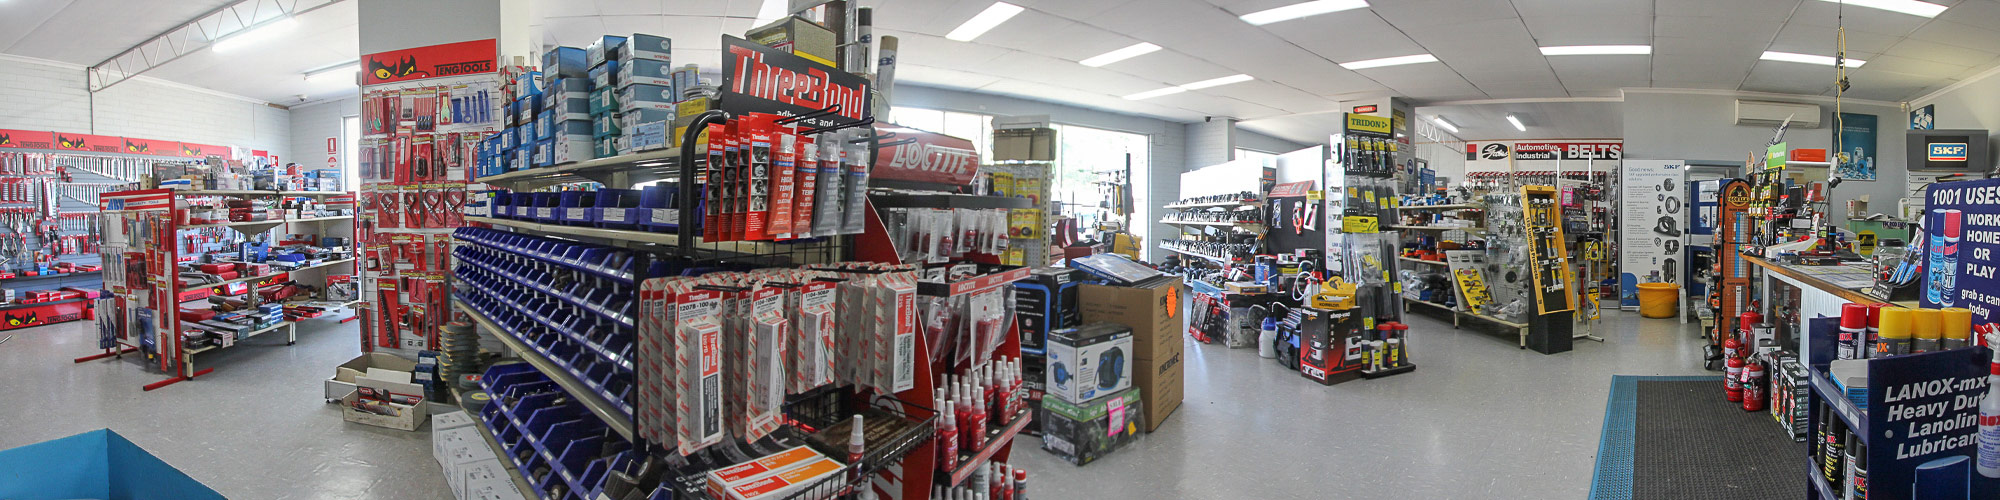 Side angle of Morwell store showign wide range of products